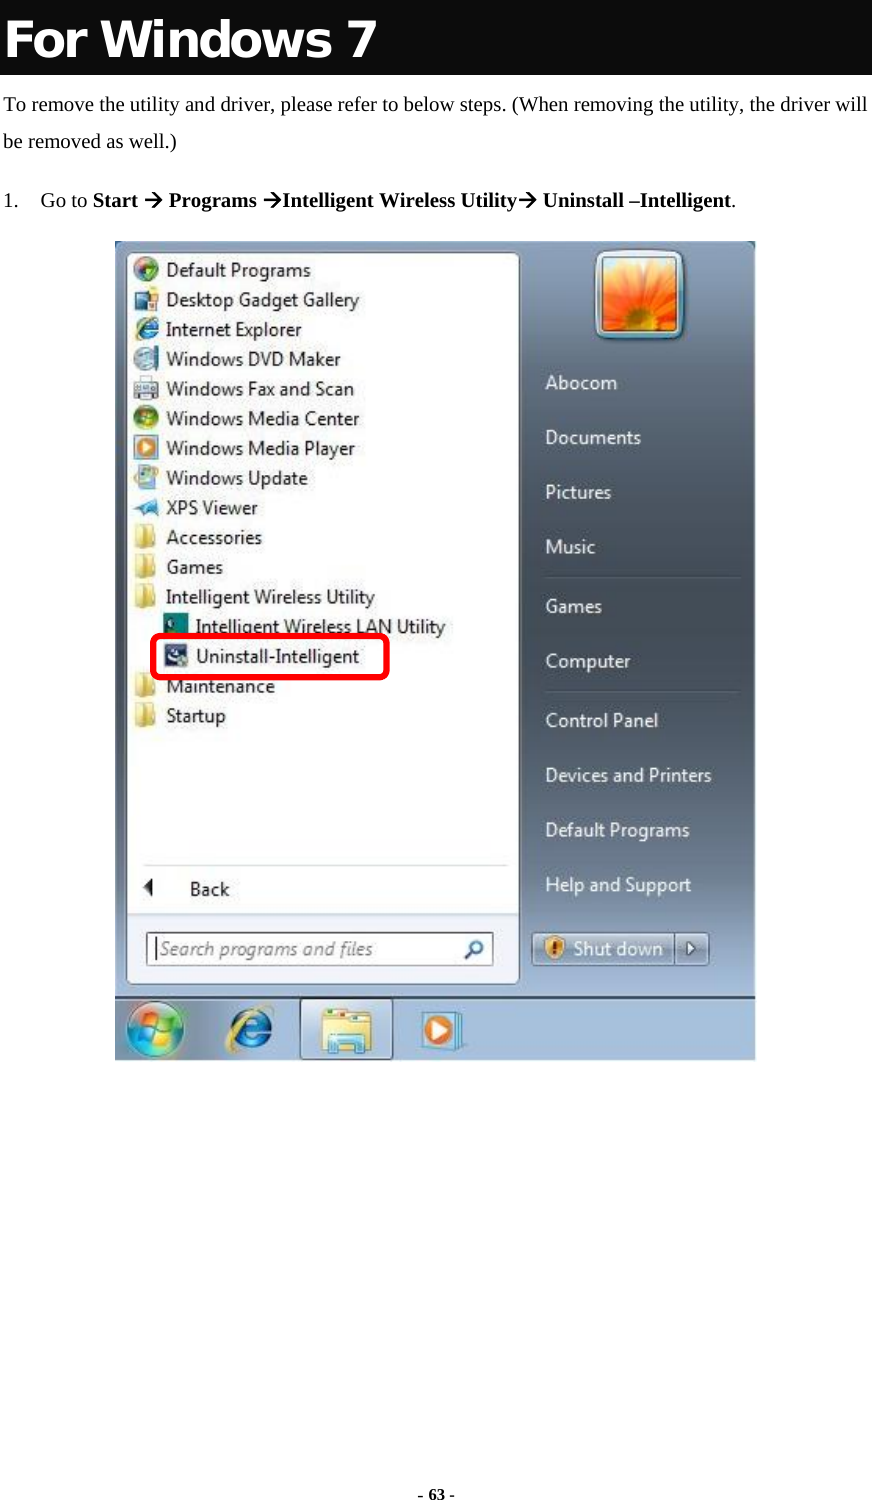  - 63 -  For Windows 7 To remove the utility and driver, please refer to below steps. (When removing the utility, the driver will be removed as well.) 1. Go to Start  Programs Intelligent Wireless Utility Uninstall –Intelligent.  